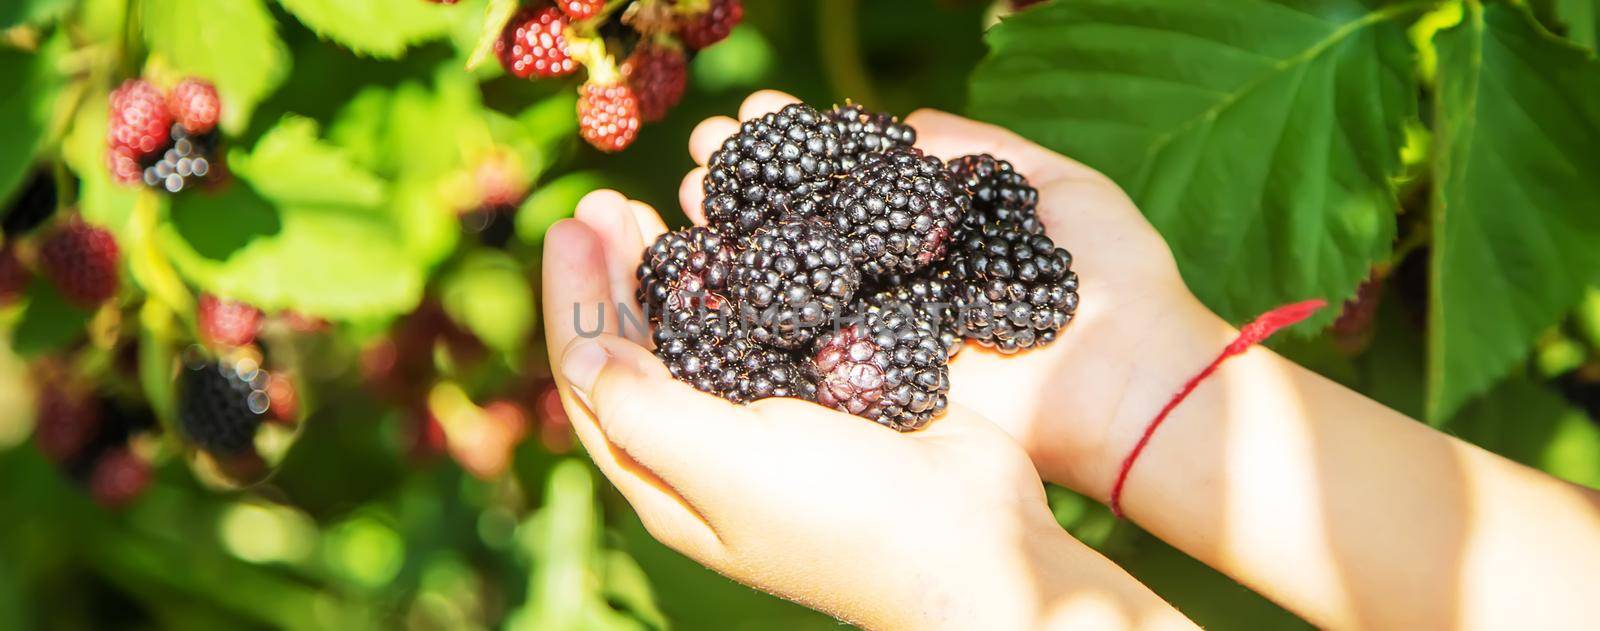 blackberry in the hands of a child on the background of nature. selective focus.food